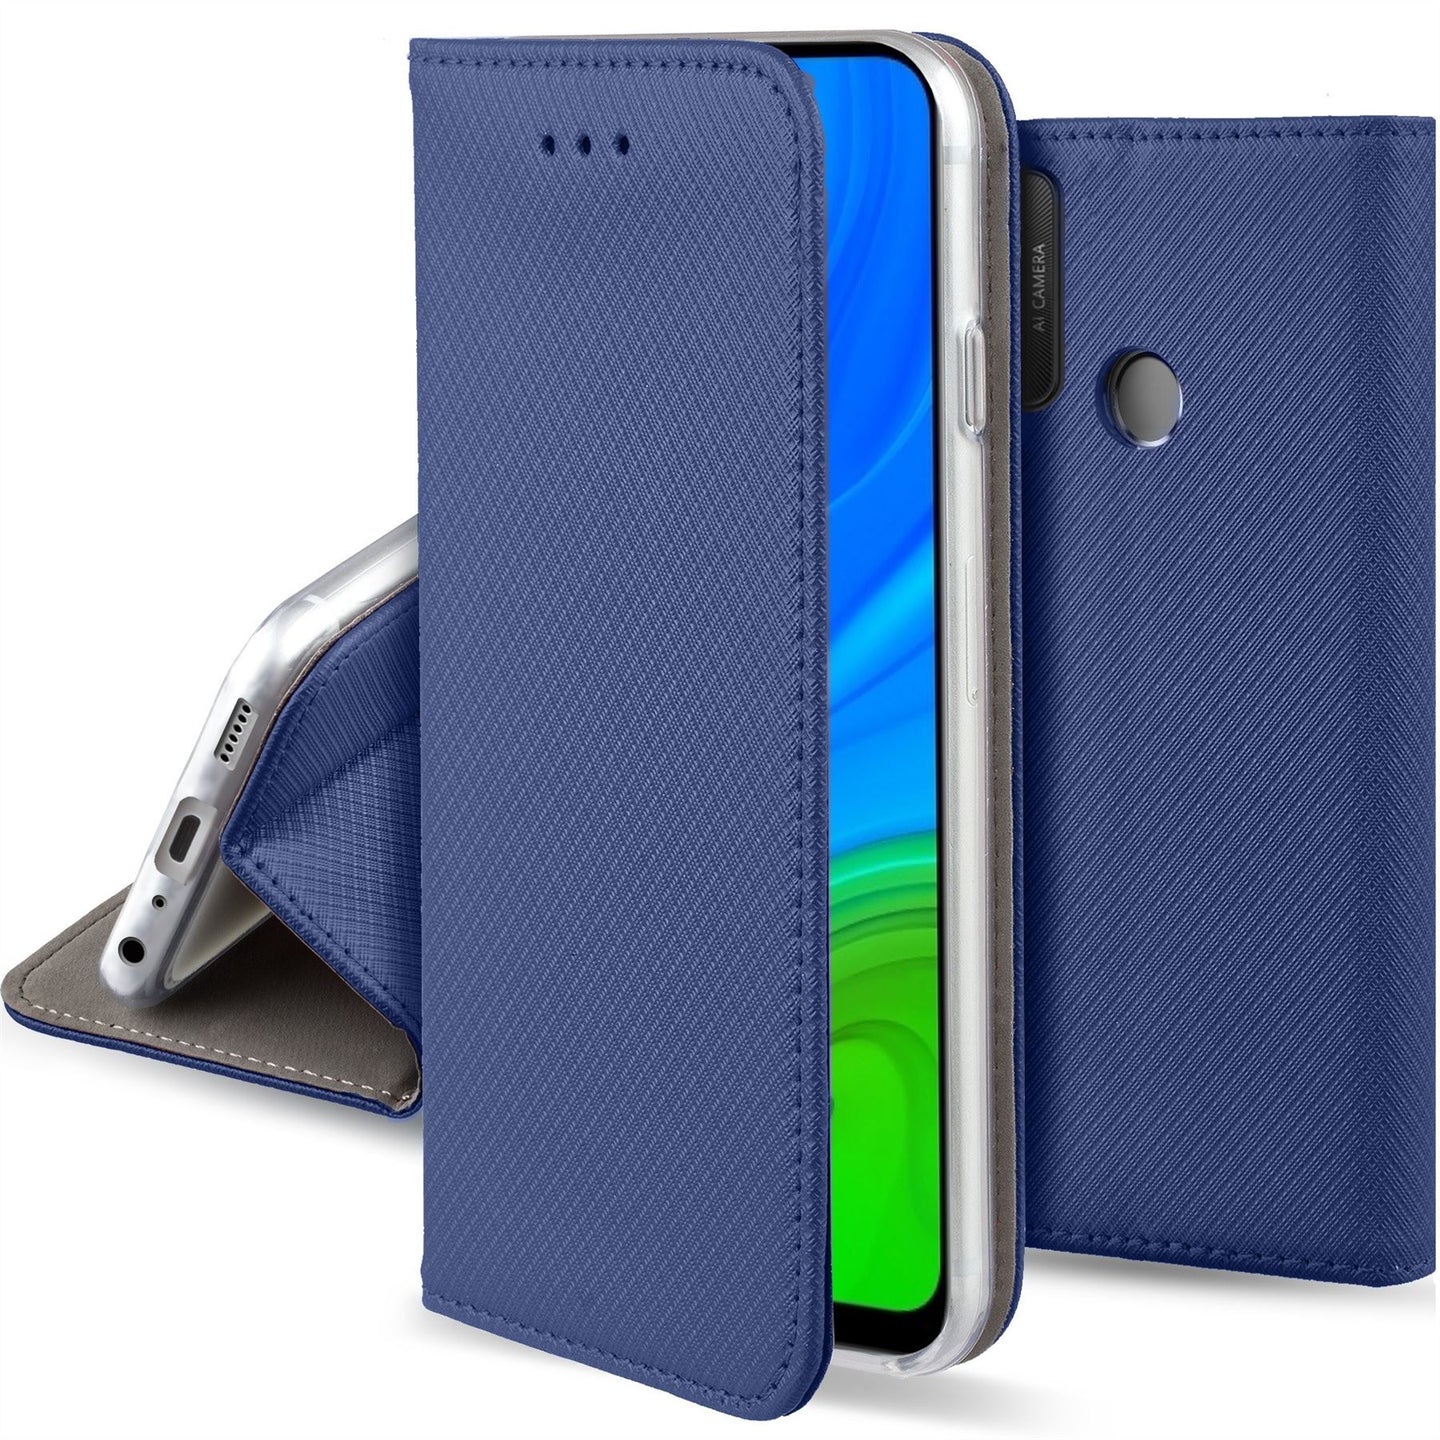 Moozy Case Flip Cover for Huawei P Smart 2020, Dark Blue - Smart Magnetic Flip Case with Card Holder and Stand